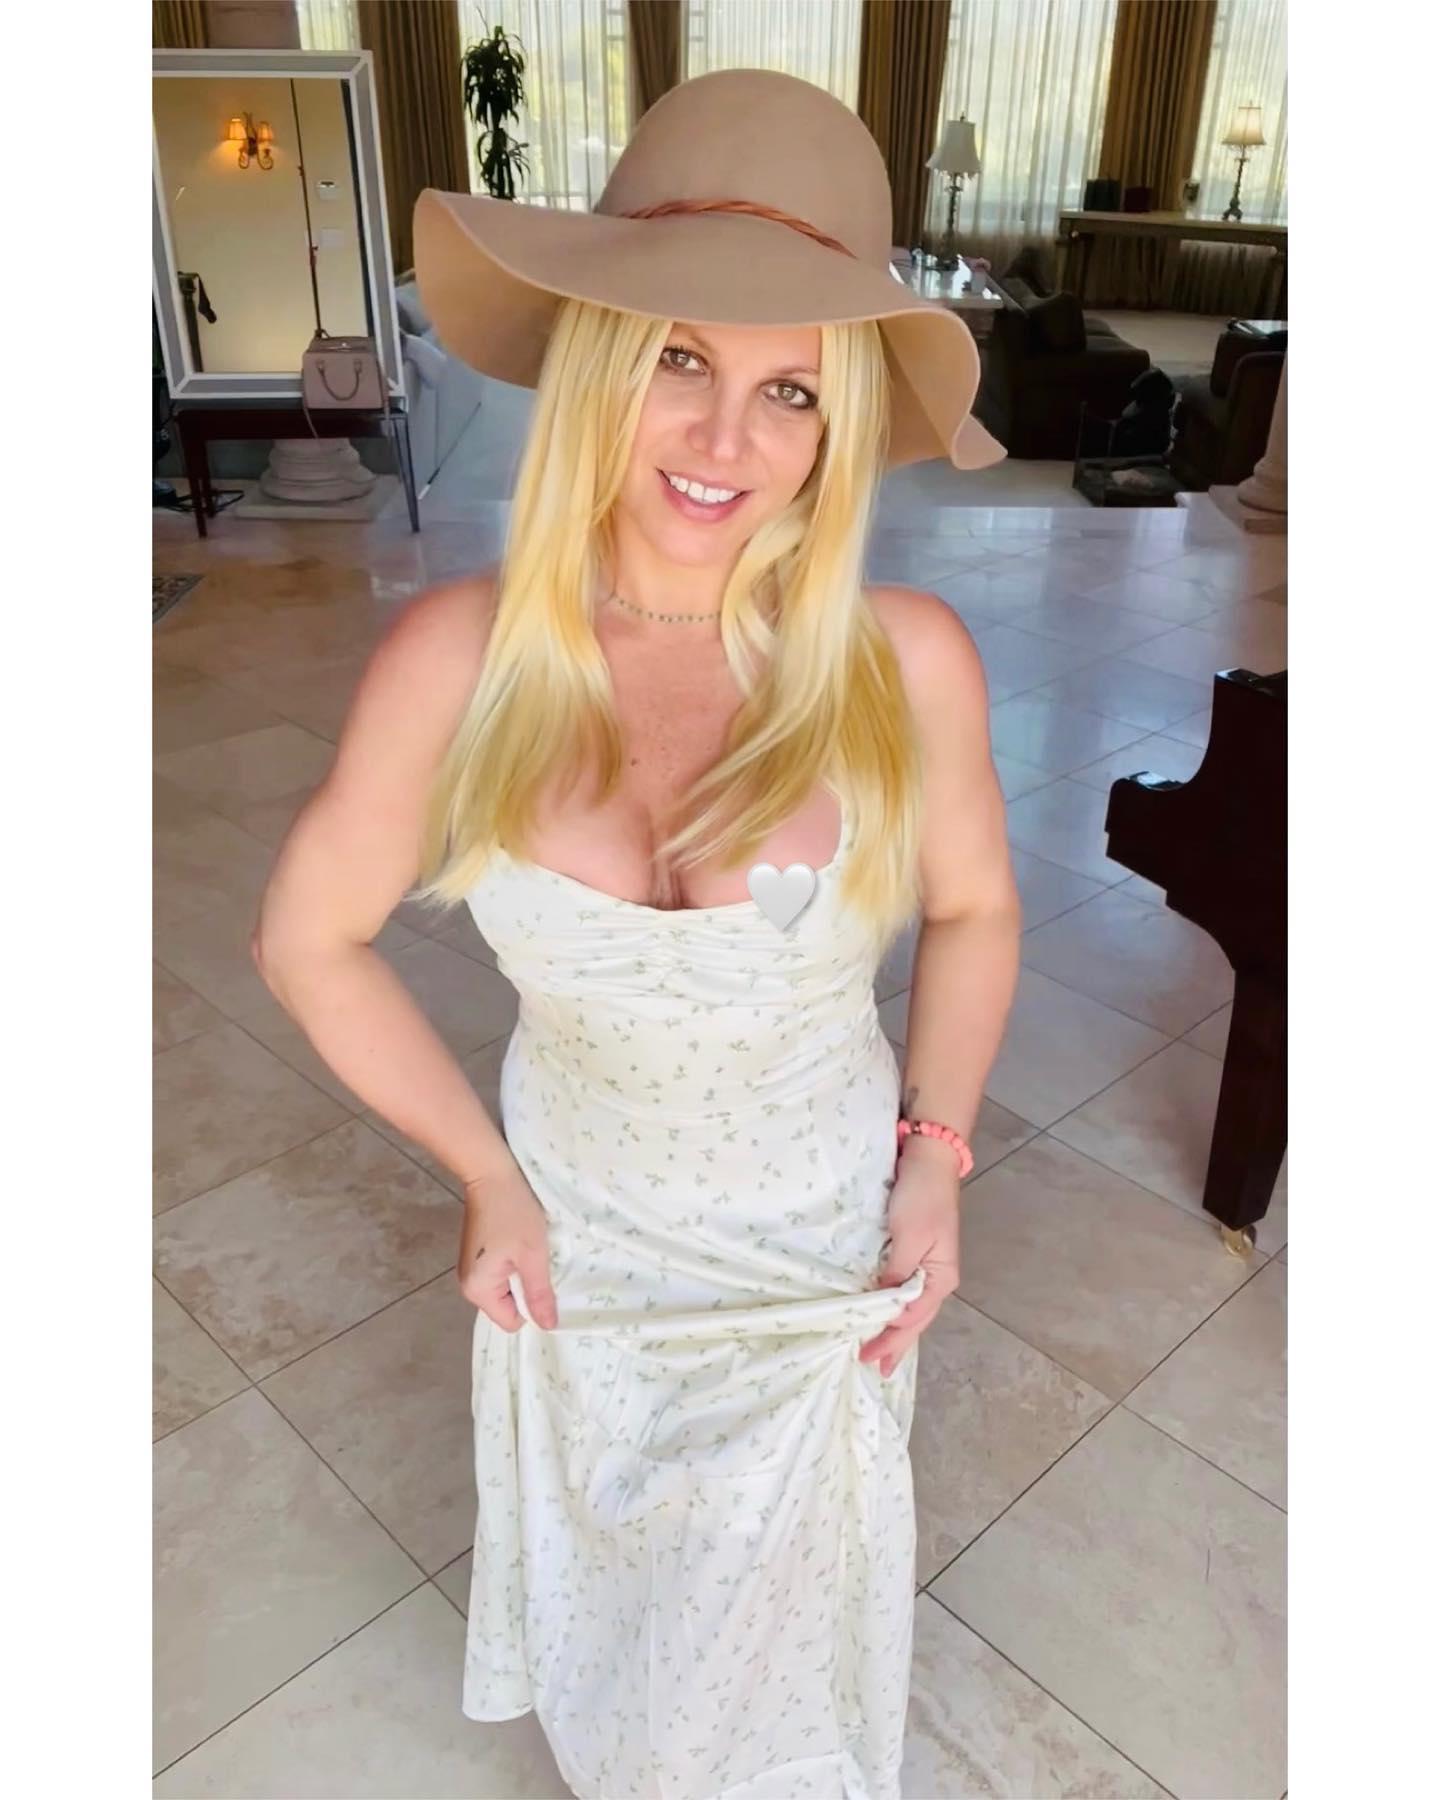 Britney Spears Suffers A Nip Slip In White Floral Dress